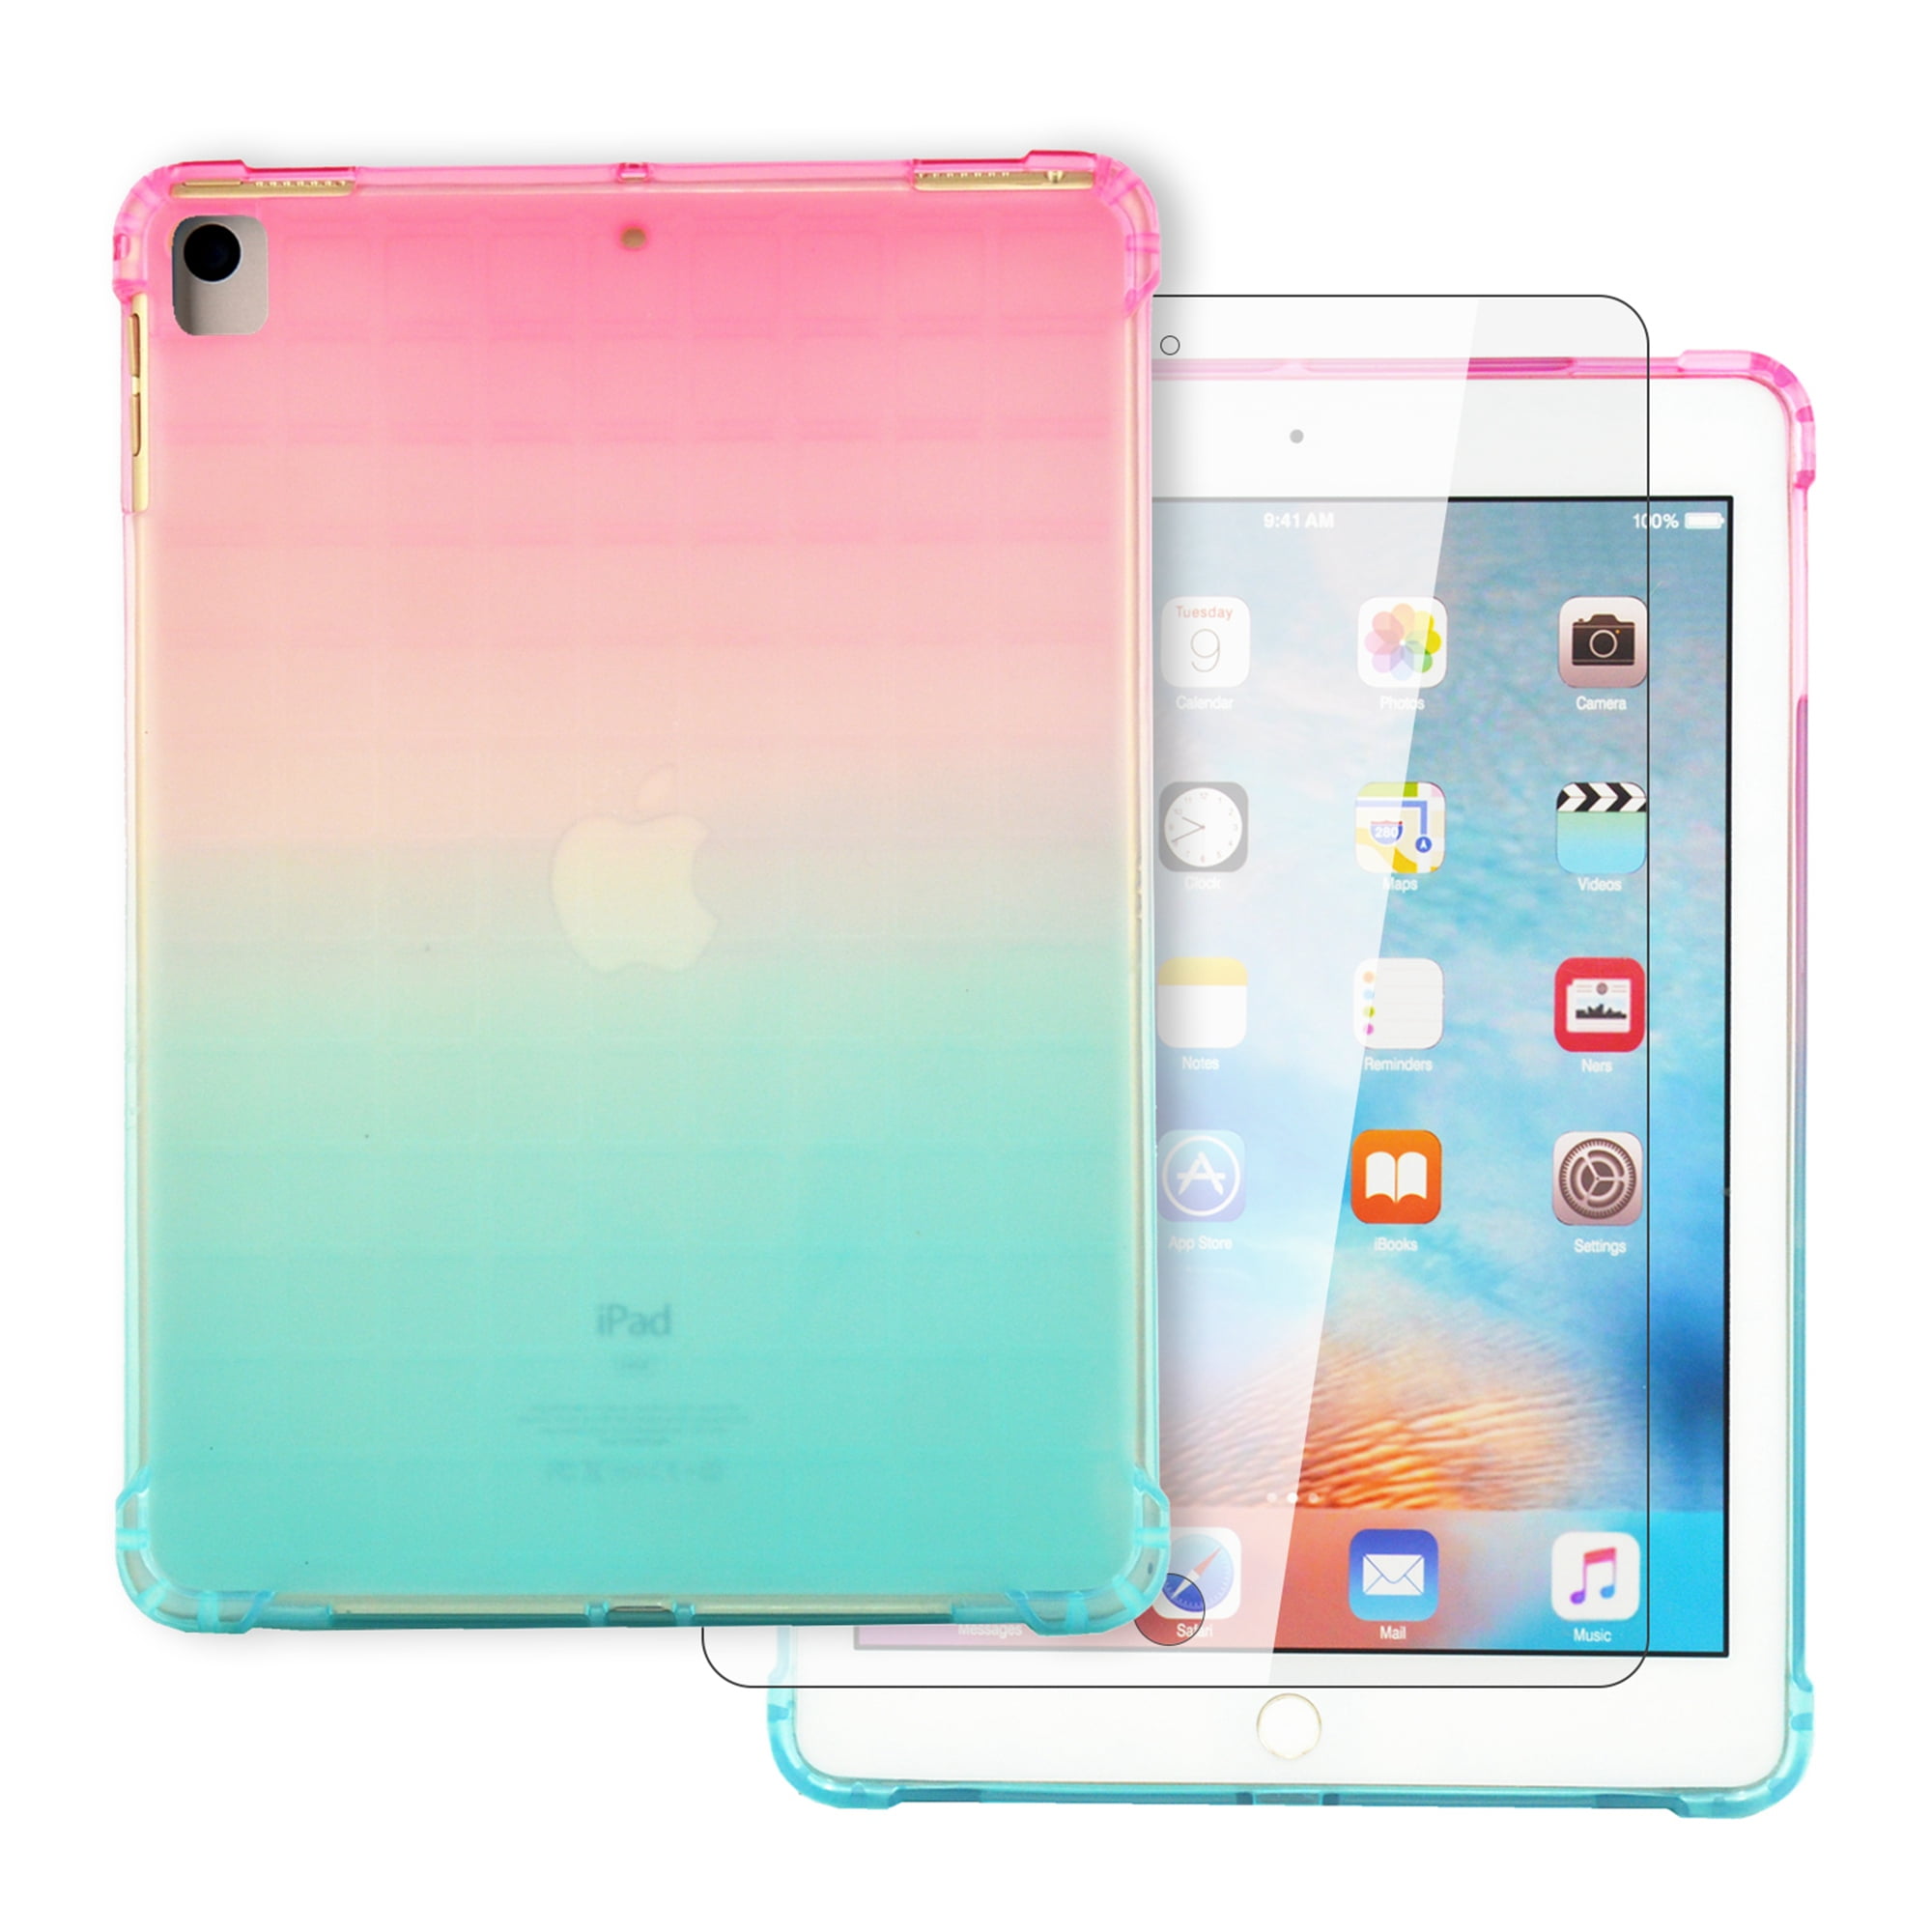 iPad 6th Gen Case with Tempered Glass Screen Protector, iPad 5th Gen Case, iPad Air 2 Case, Dteck Lightweight Ultra Thin Gradient Clear Case Slim Fit Soft TPU Cover,Pink/Green - Walmart.com